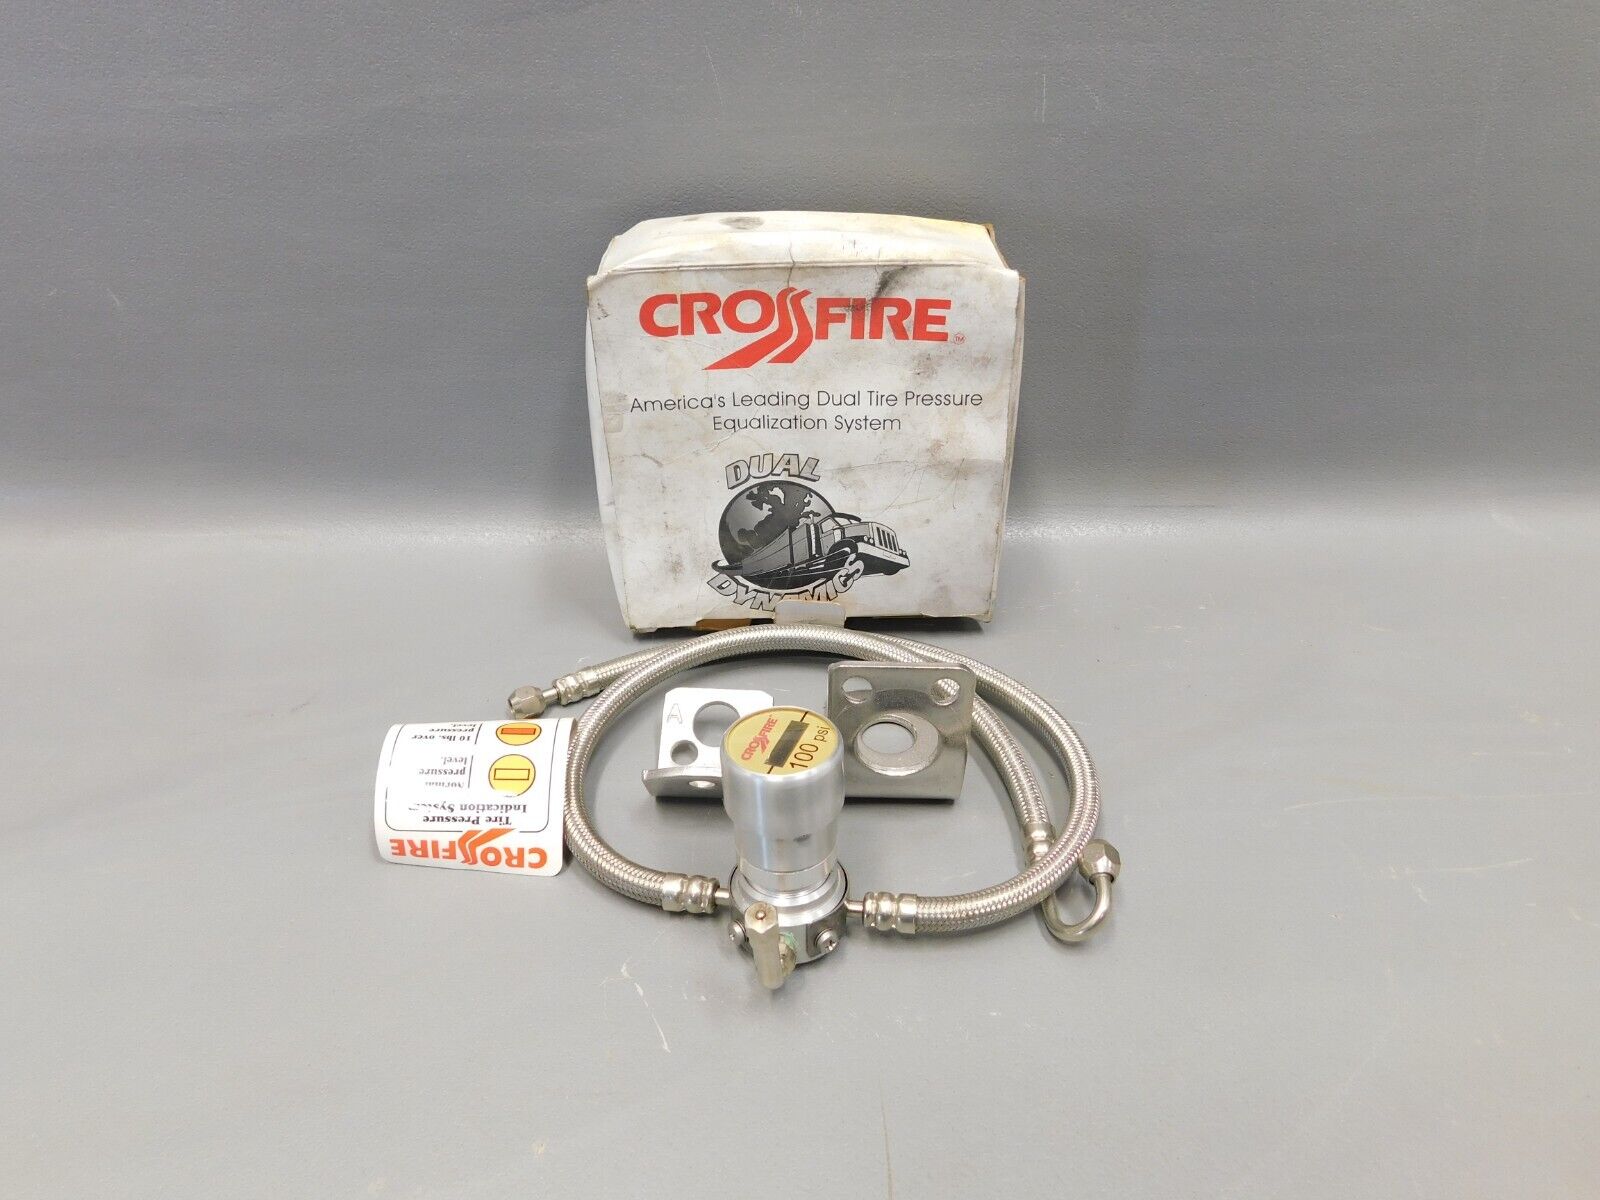 Crossfire Dual Dynamics 100psi Dual Tire Pressure Equalization System